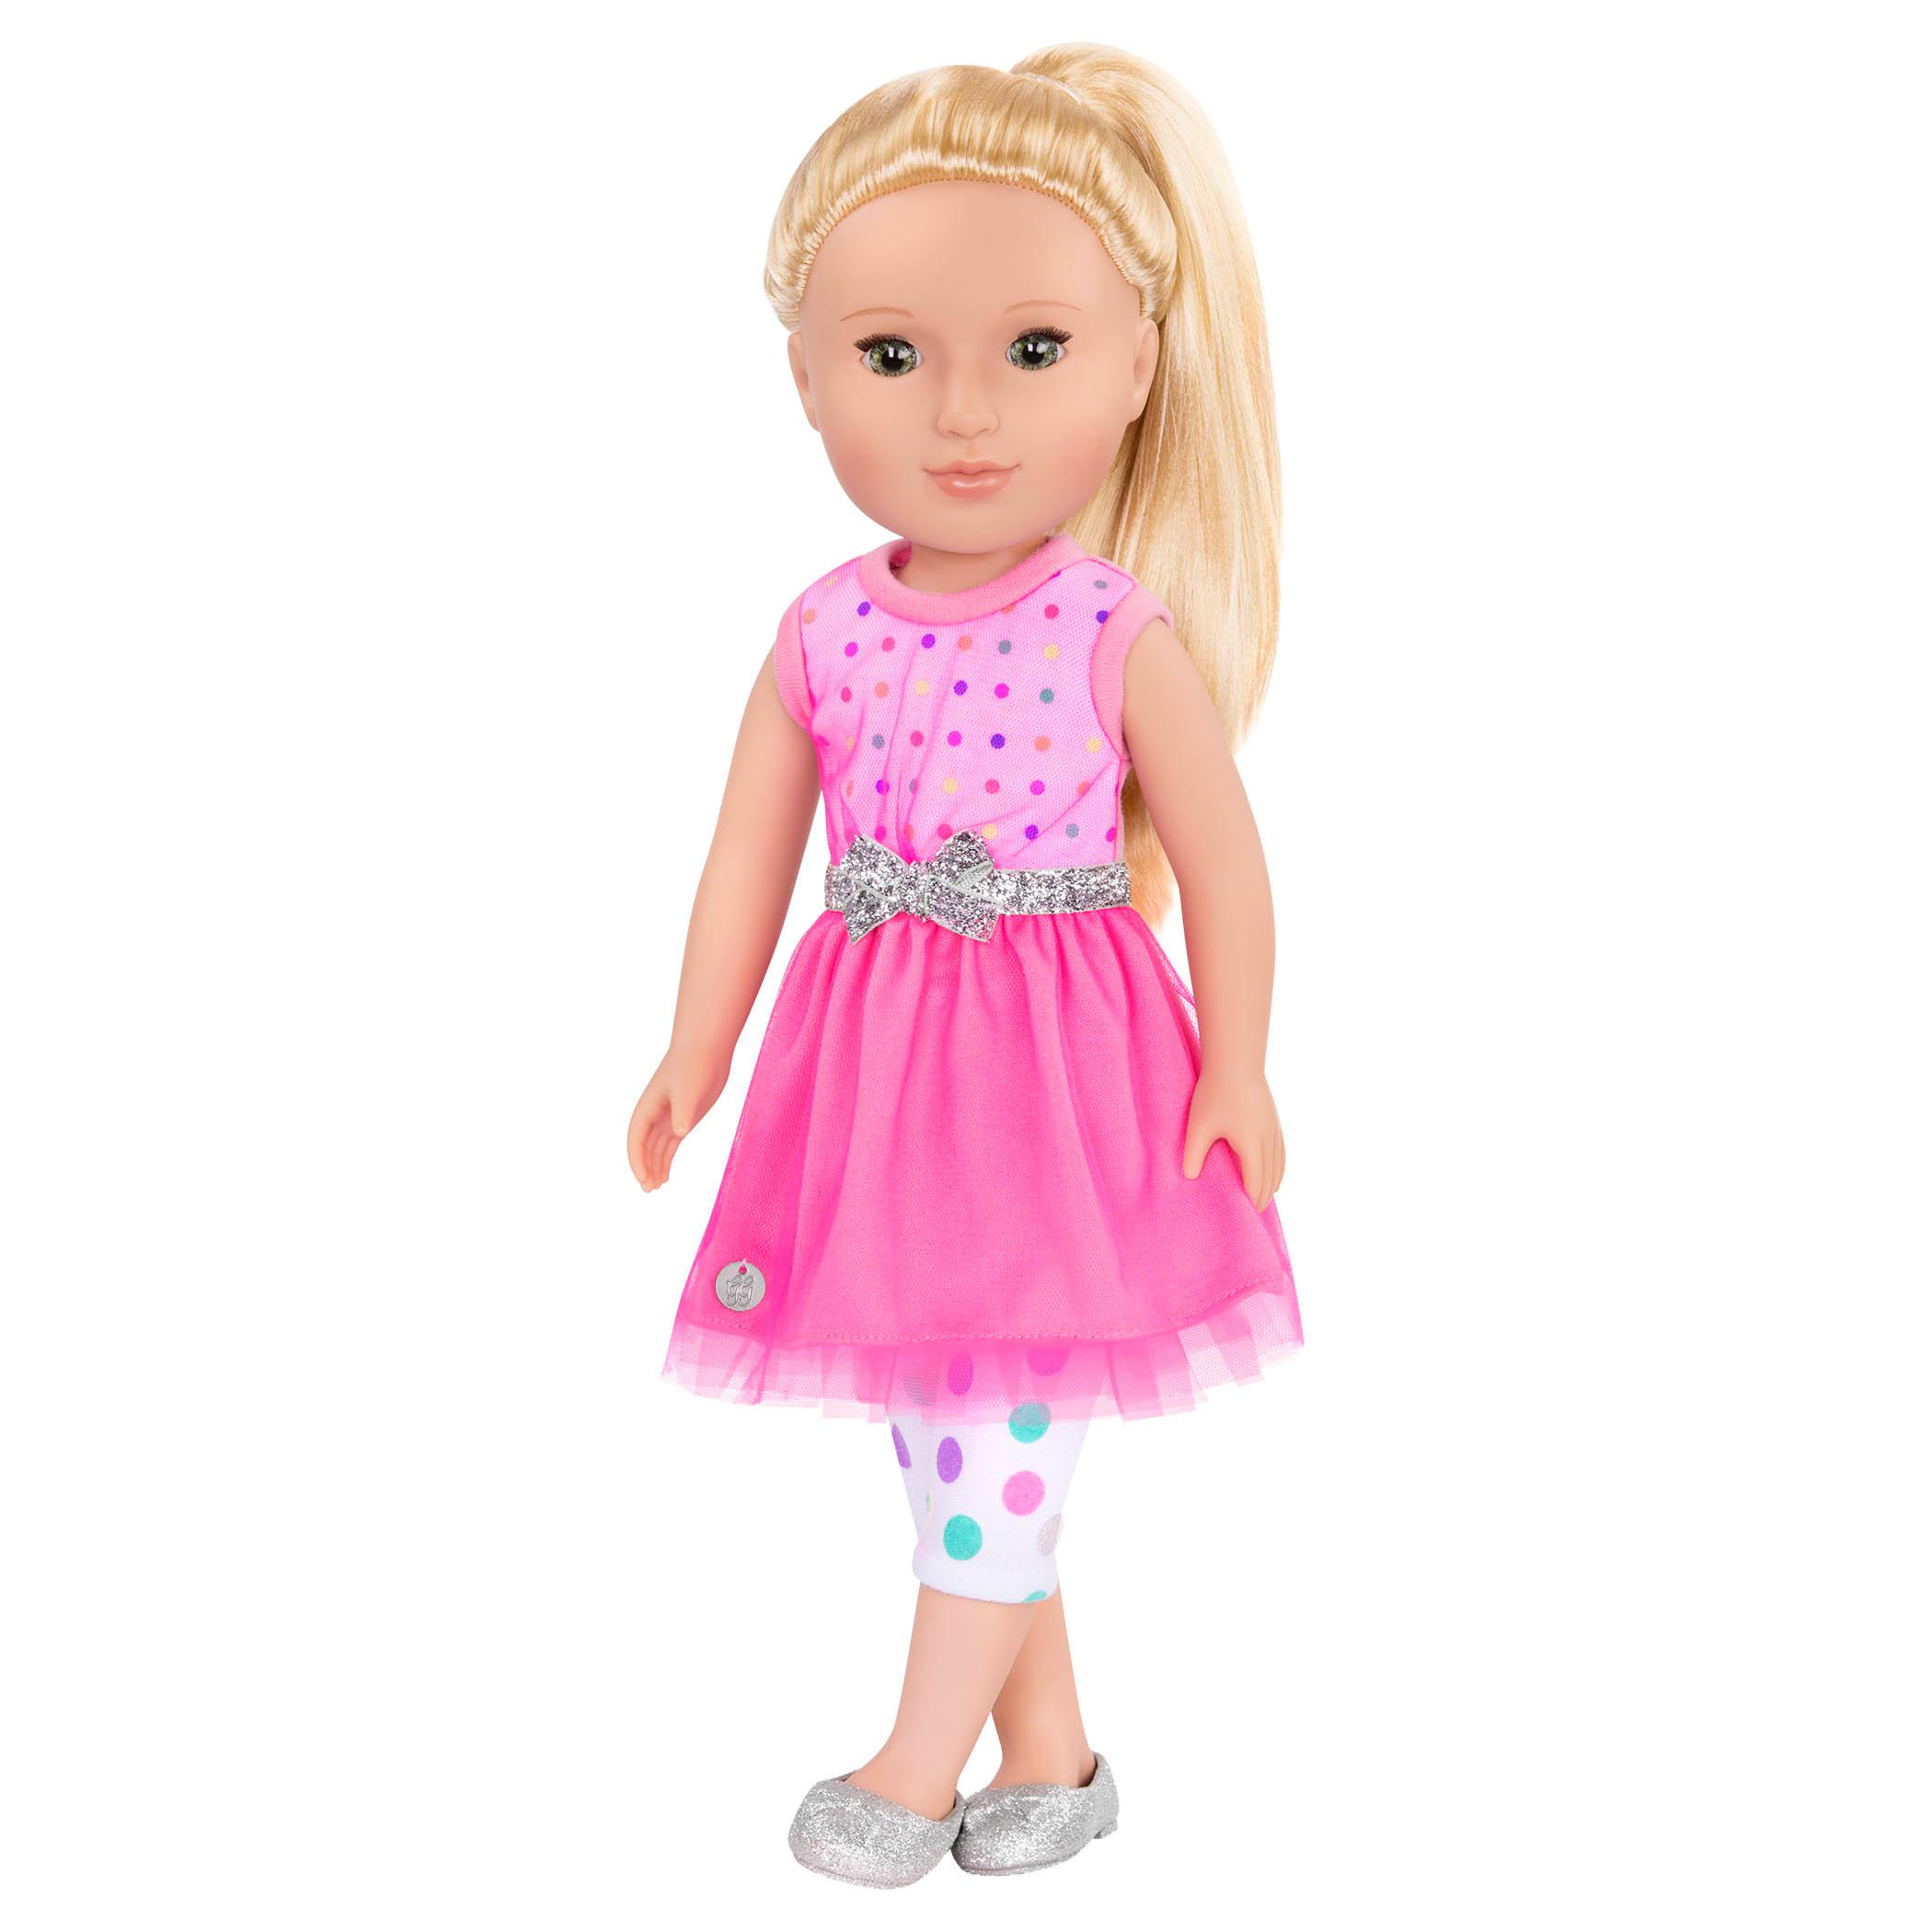 Free Knitting Patterns For 14 Inch Doll Clothes Glitter Girls Battat Fifer 14 Inch Non Poseable Fashion Doll Dolls For Girls Age 3 And Up